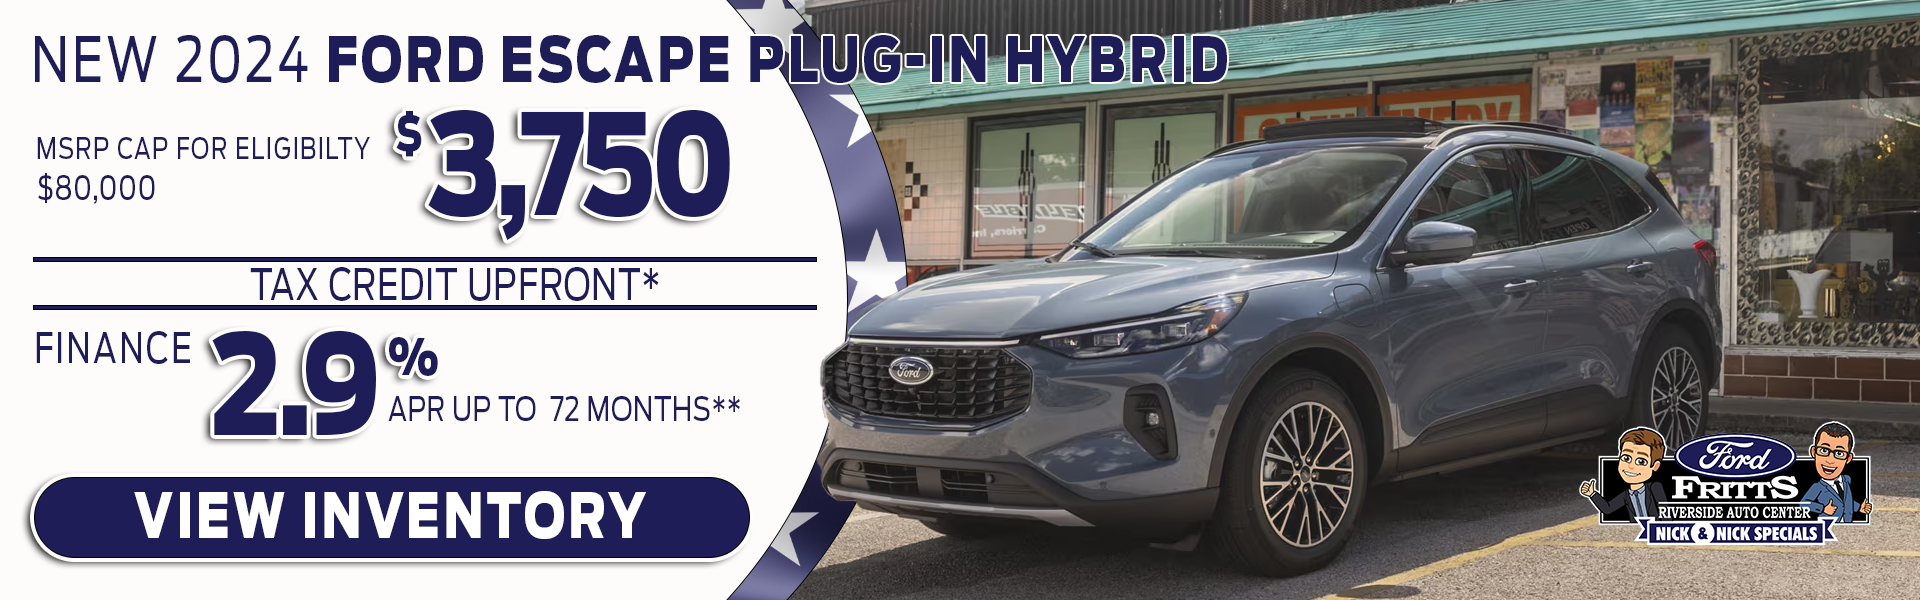 2024 Ford Escape Hybrid Offering $3,750 tax credit